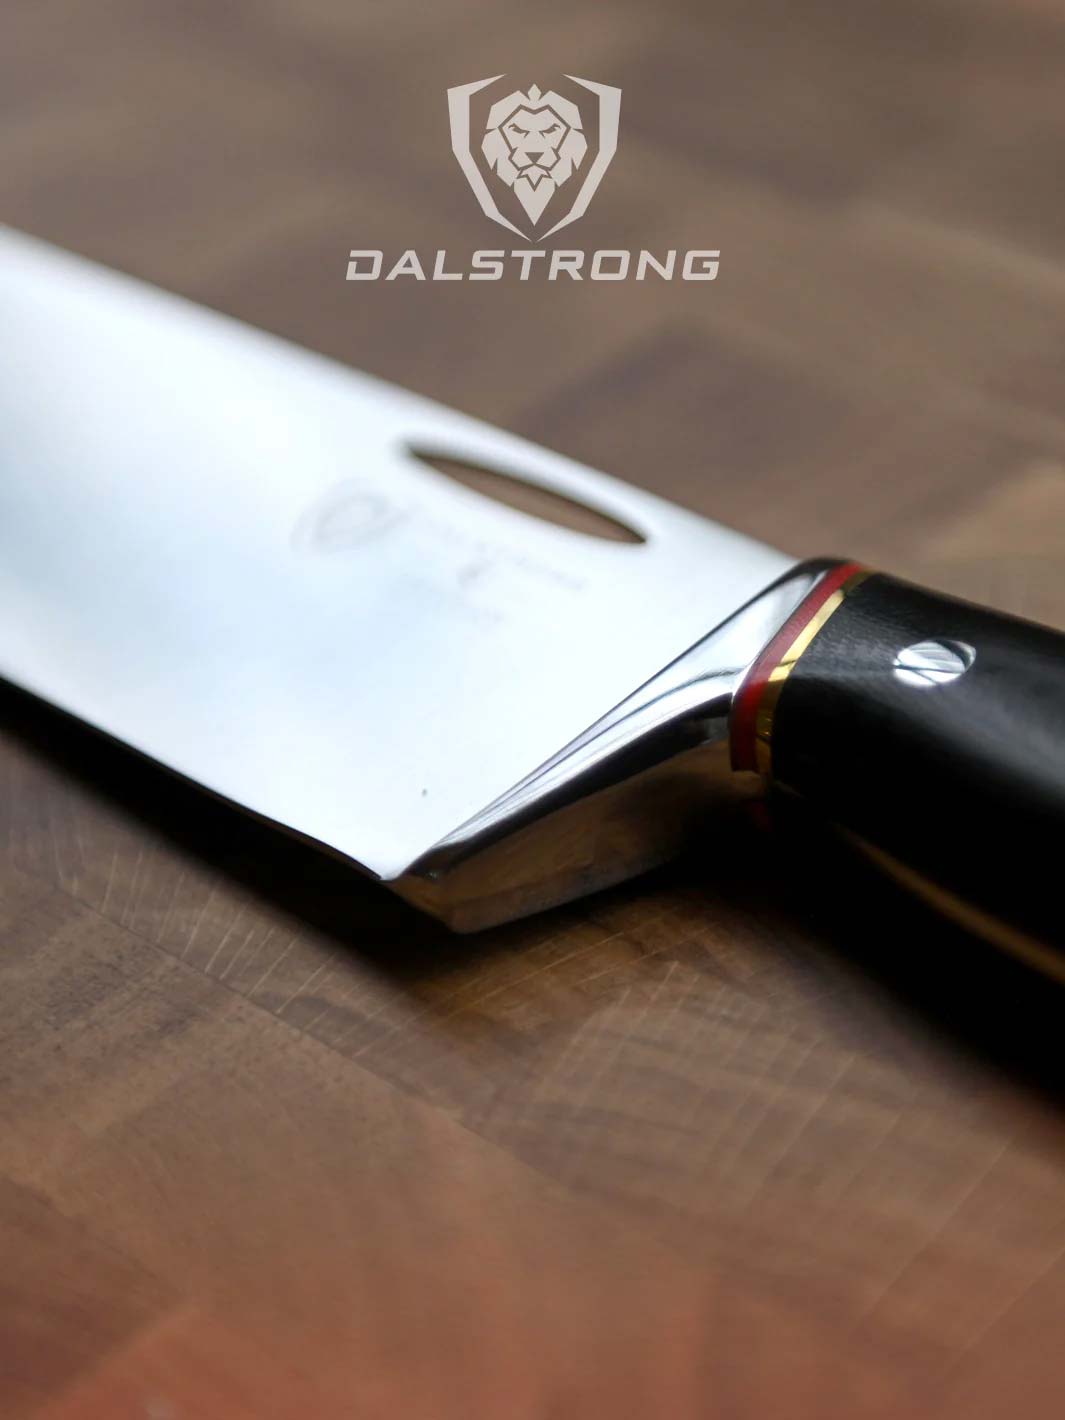 Dalstrong centurion series 10 inch chef knife with black handle on a cutting board.